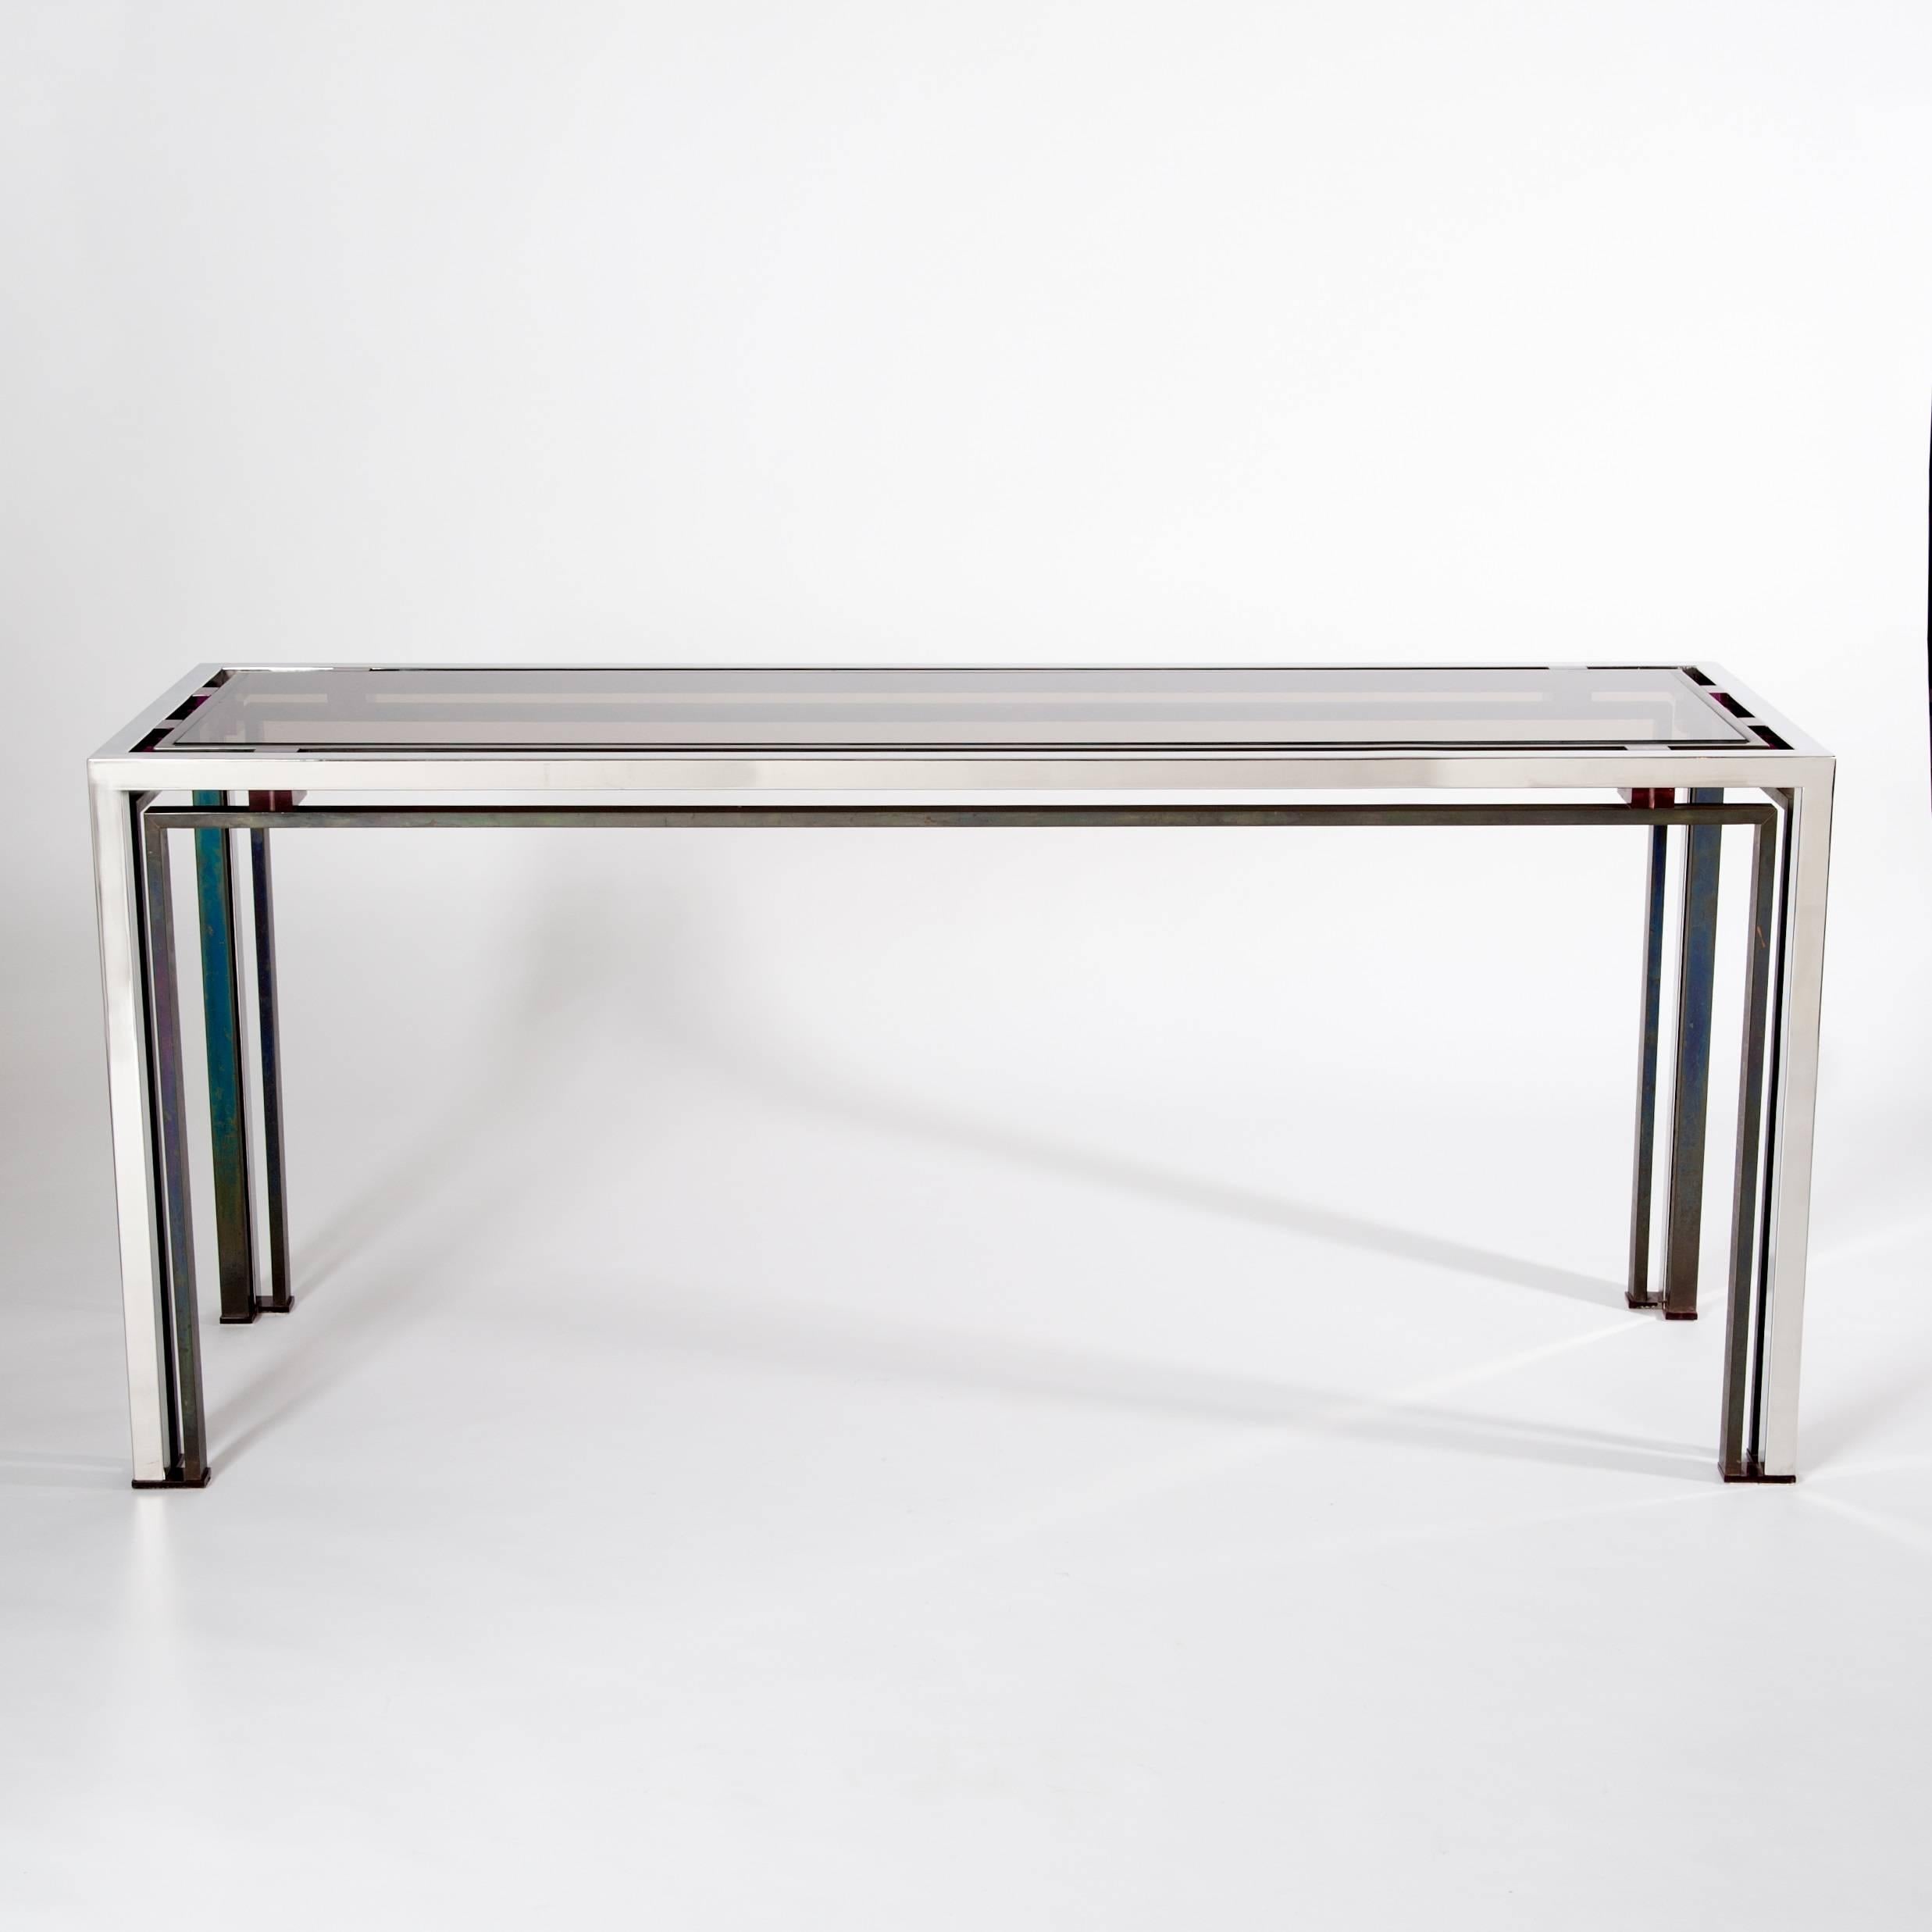 Mid-Century Italian chromed and bronzed console table by Romeo Rega.
Straight design of a modern console table with chromed brass and bronzed brass frame - 
Fuchsia colored bakelite parts of 2.0cm in between on the top.
The ends of the legs are also